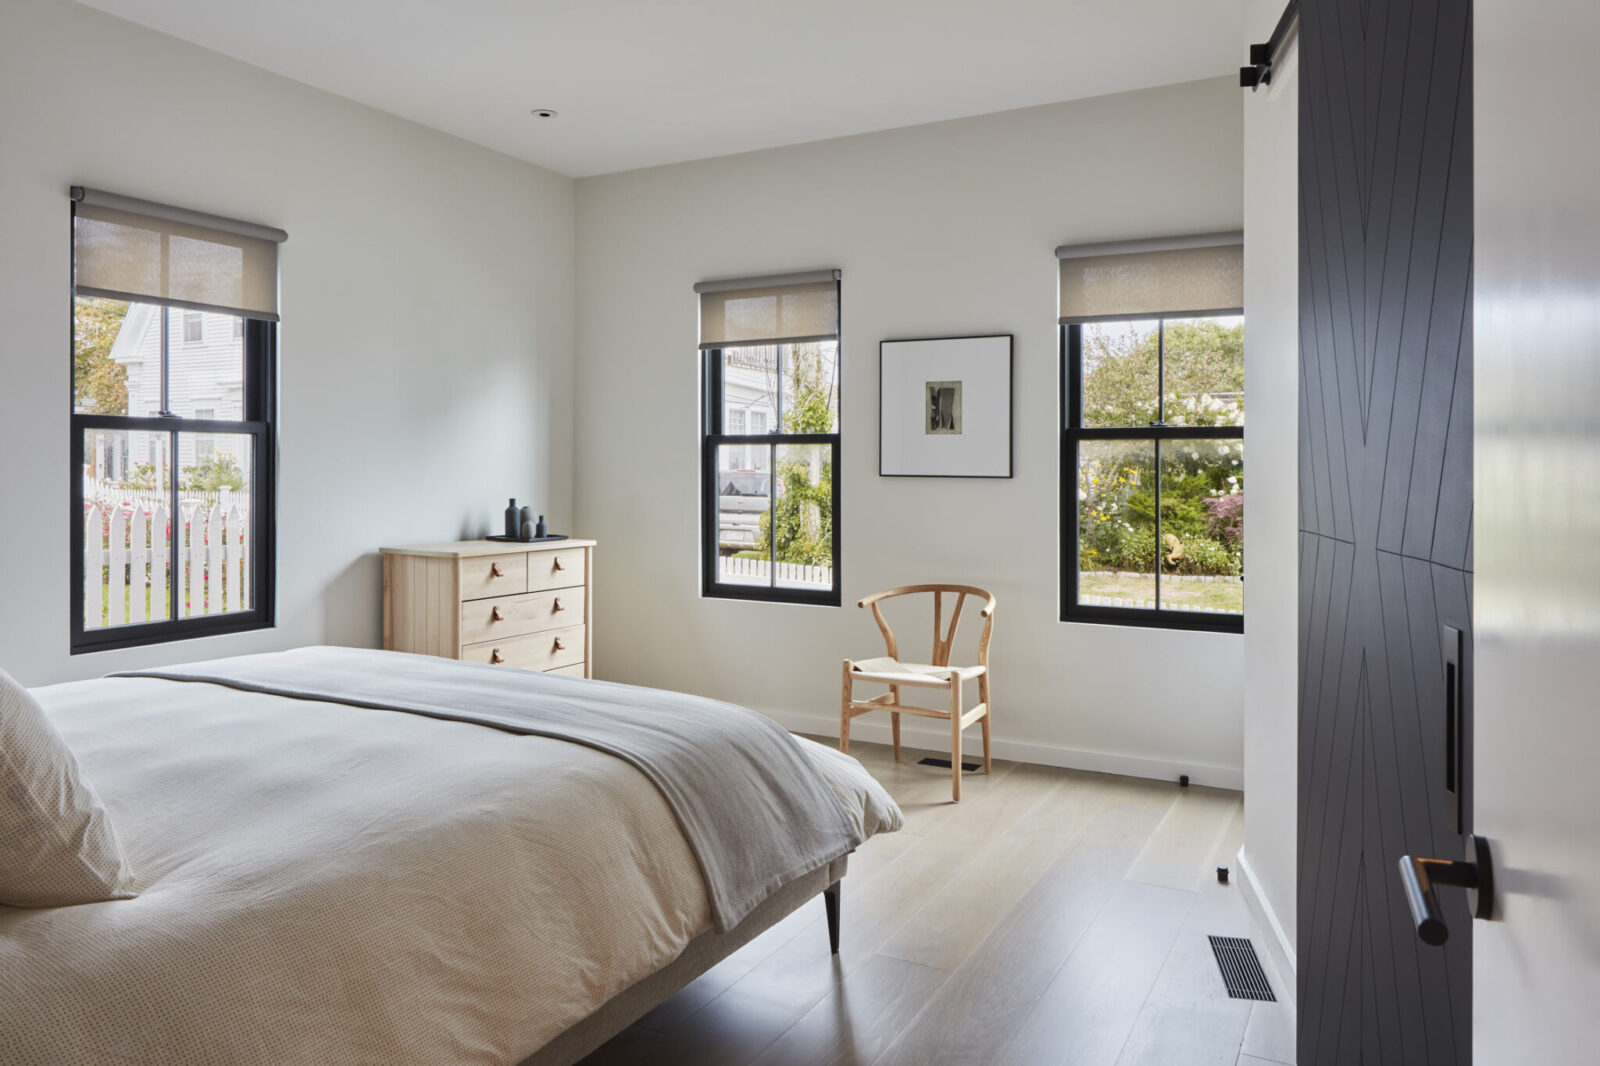 Example image of why is indoor air quality important, showing bedroom of Provincetown House